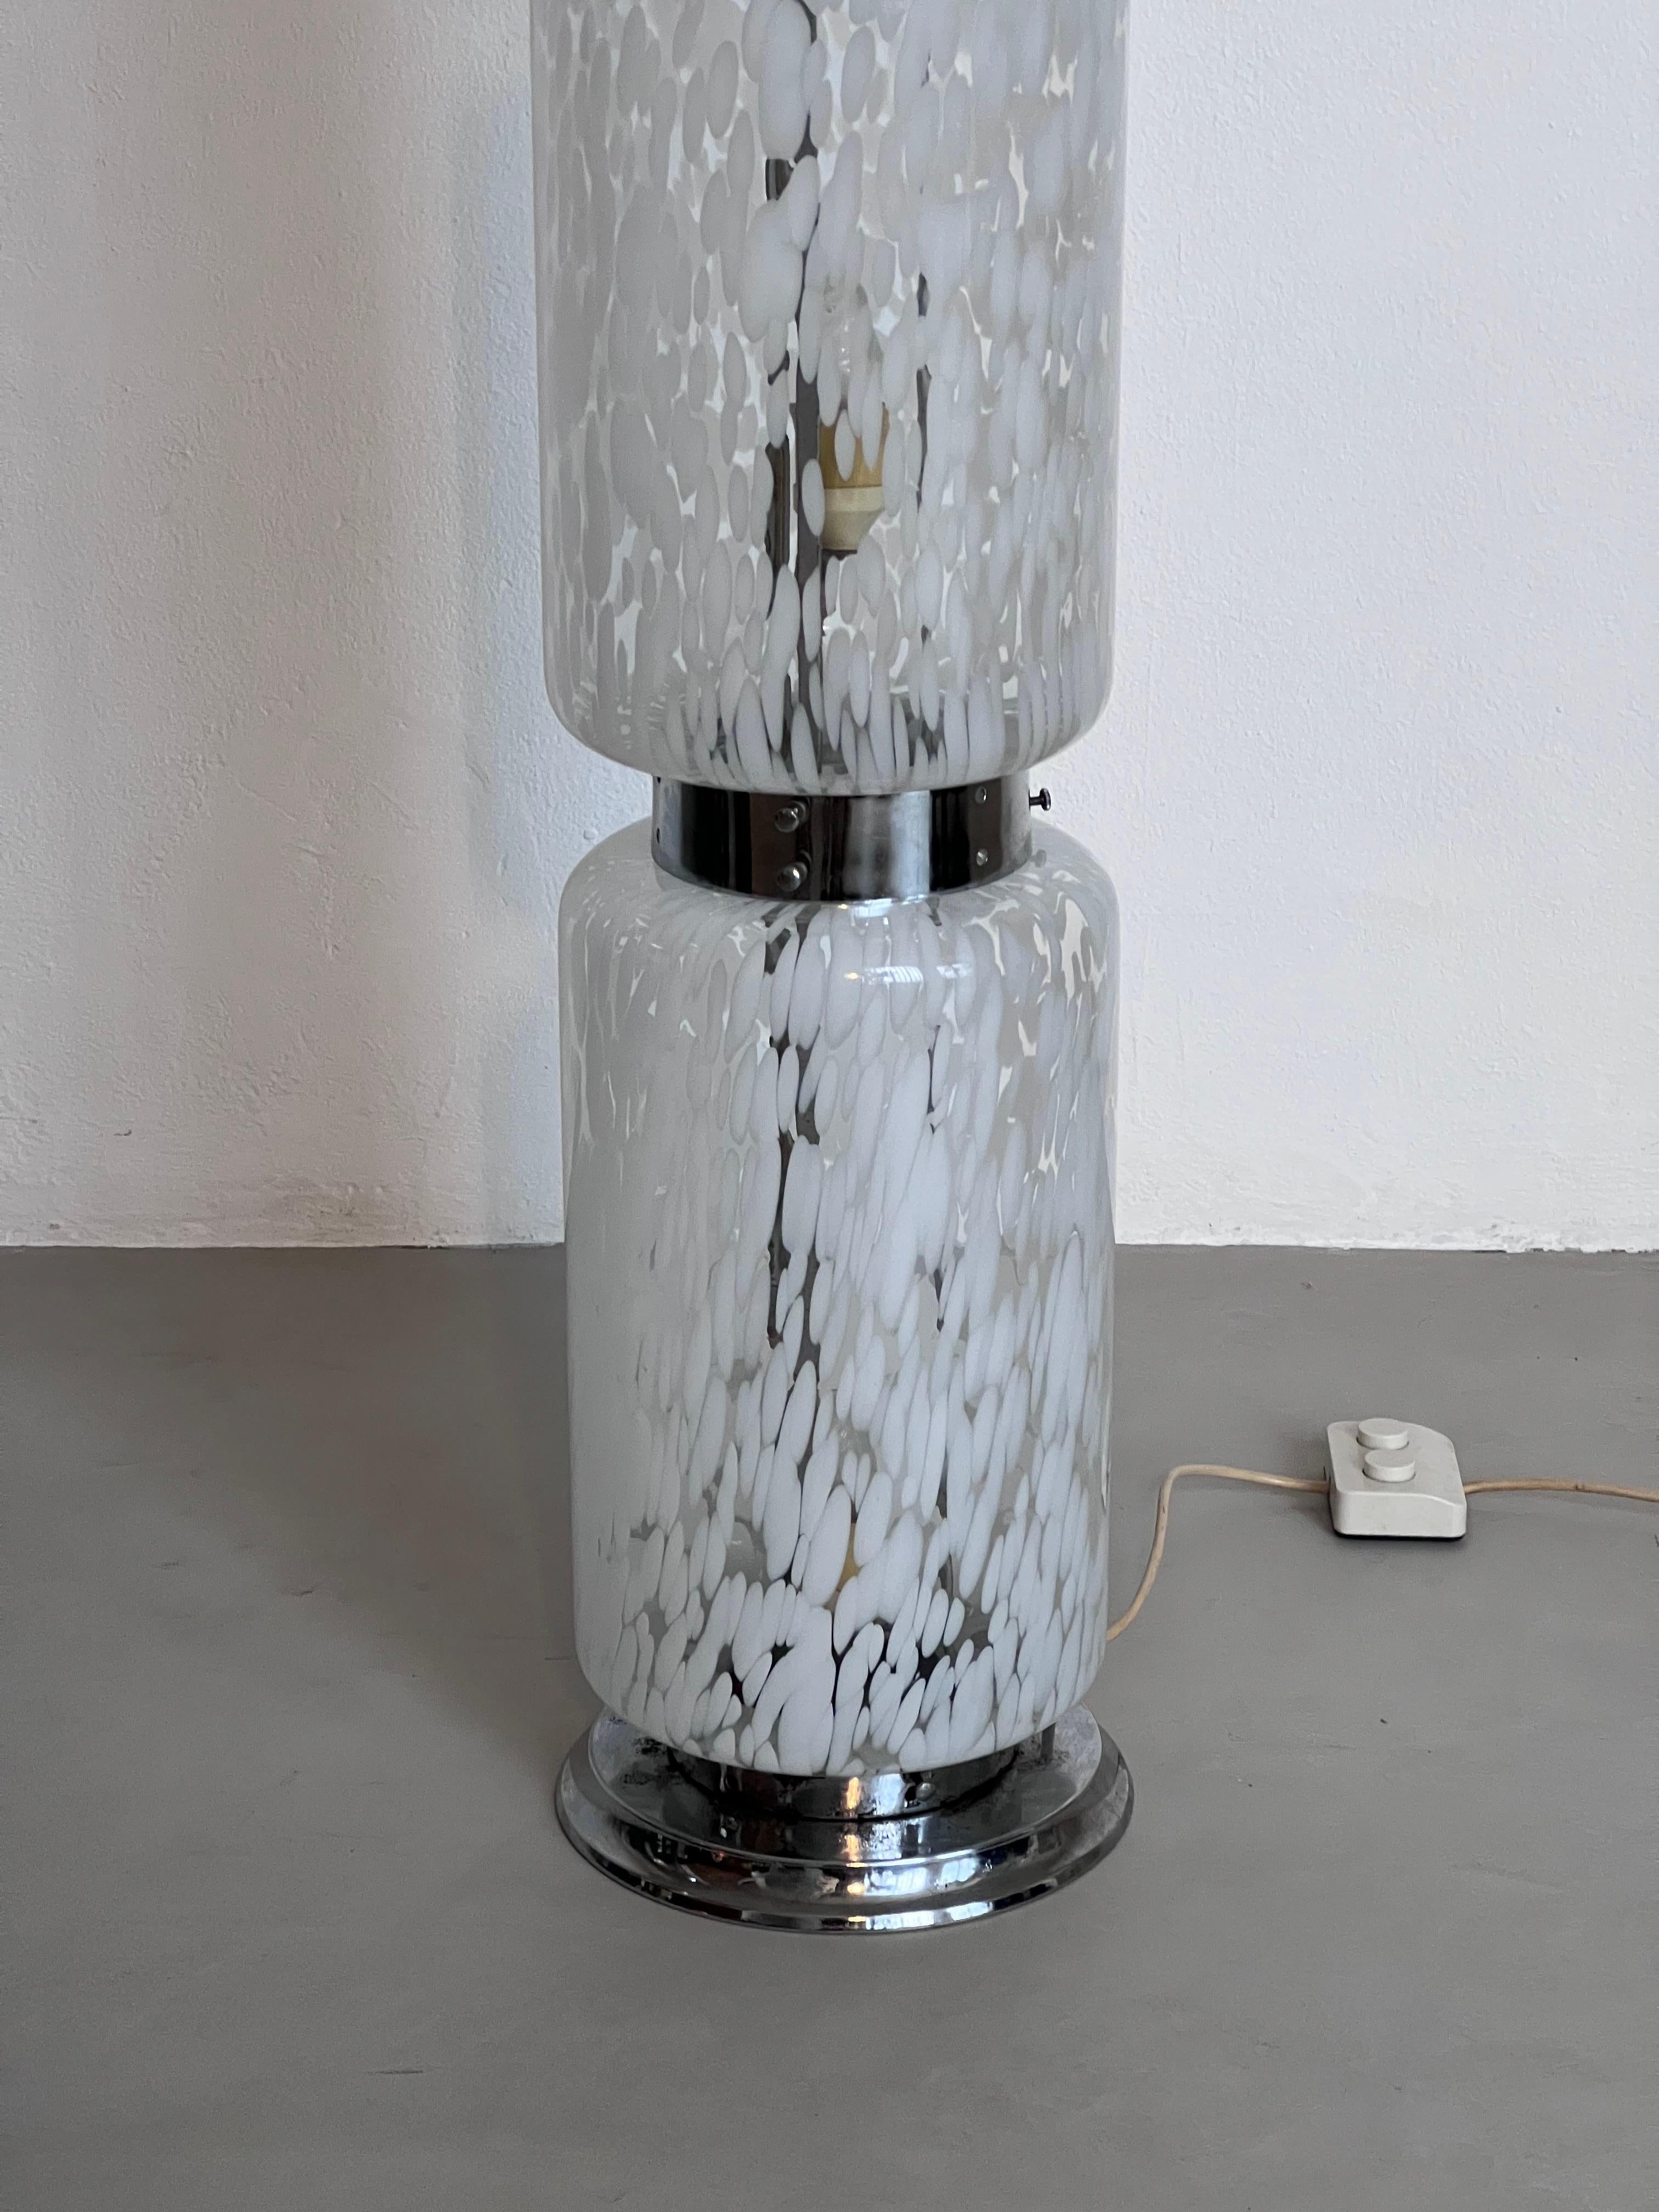 Mid-Century Modern floor lamp - Glass floor lamp - Murano style light

A nice and decorative floor lamp from the Spinzi Milano curated selection. In spotted glass, with three cylindrical bodies connected by chromed metal rings. Made in Italy in the